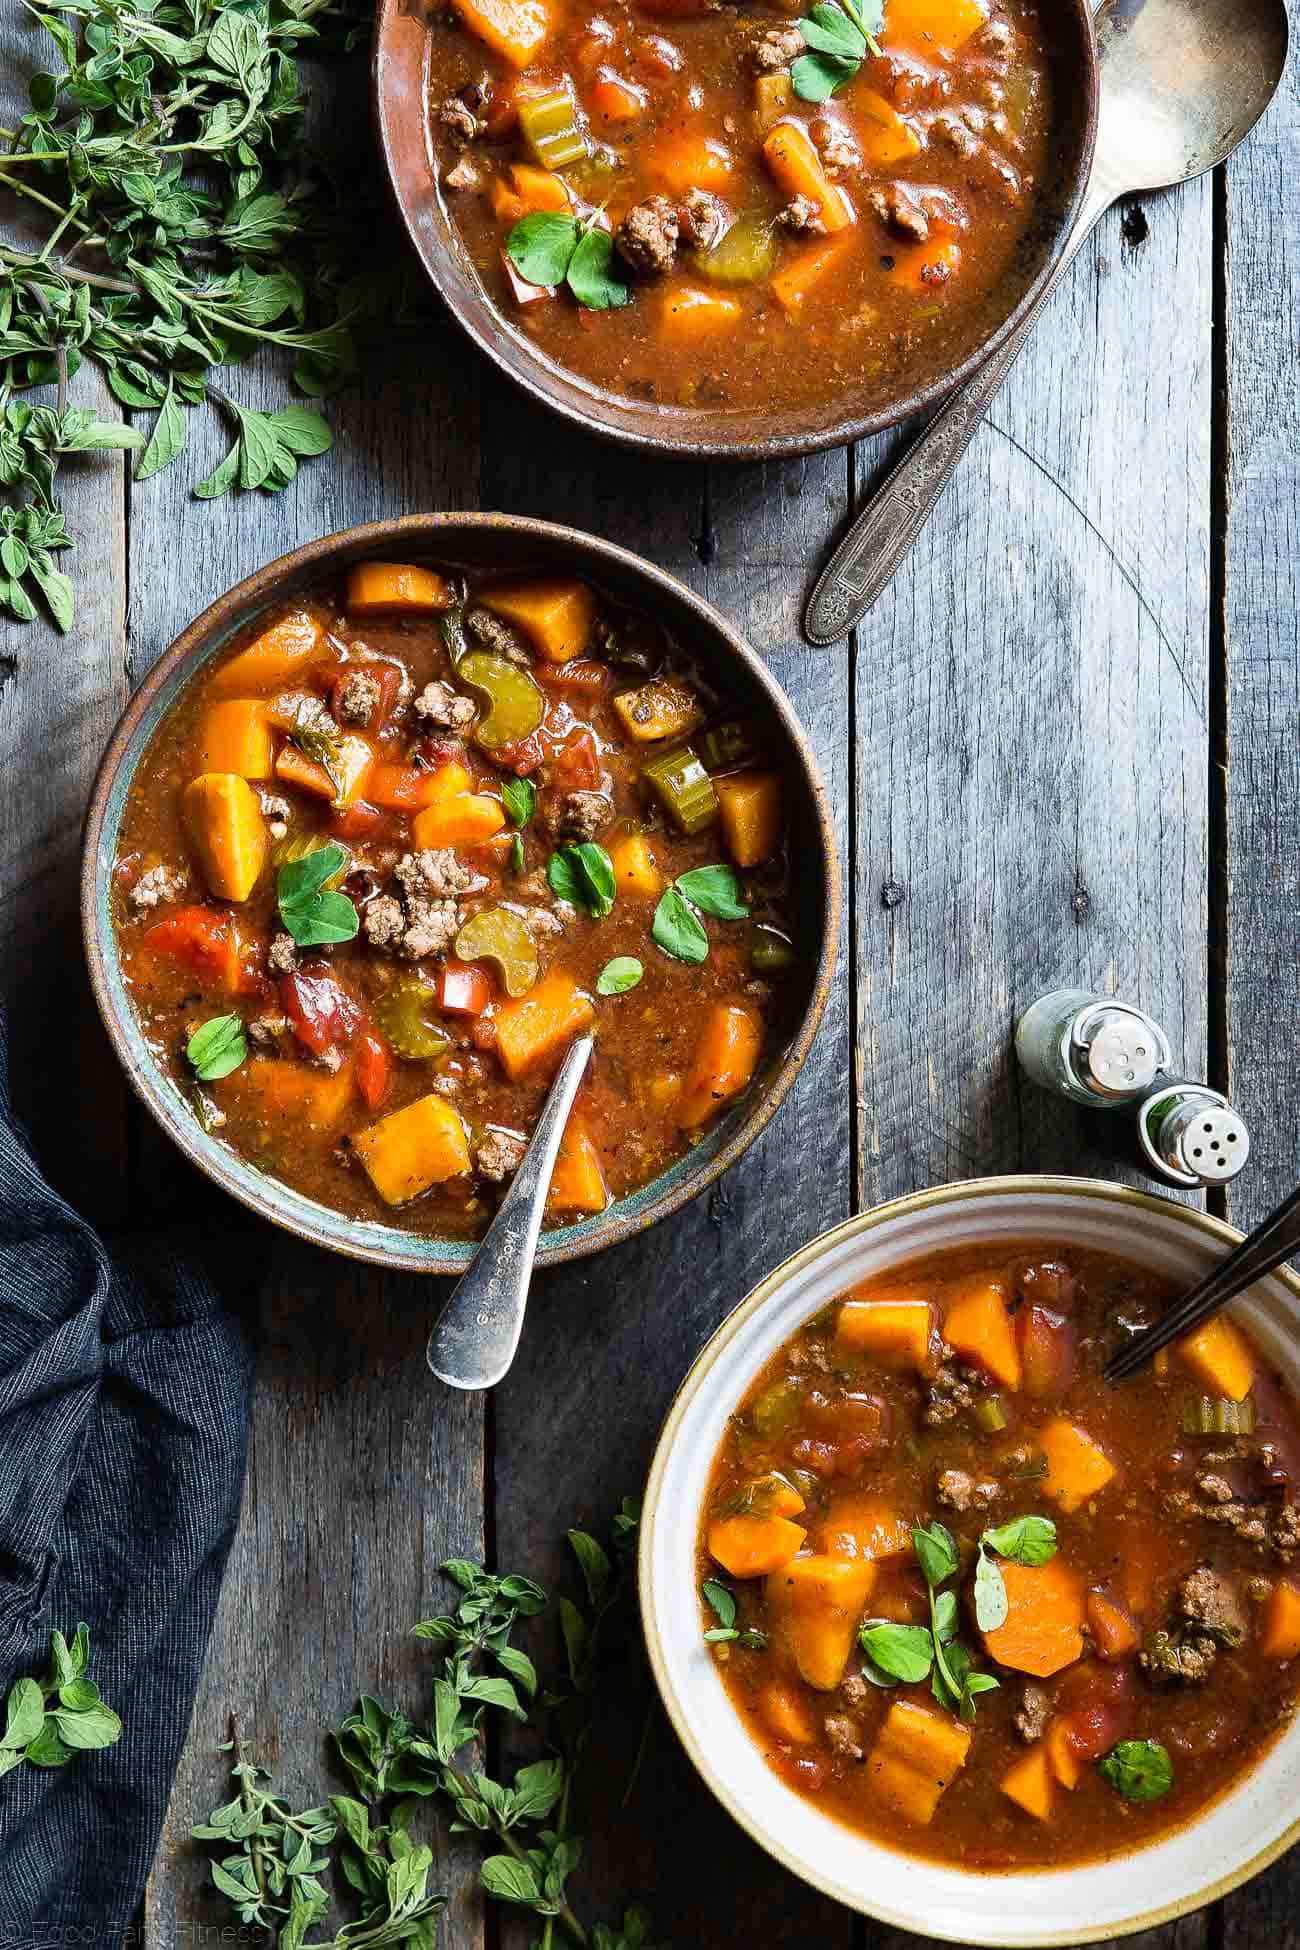 Crock Pot Paleo Hamburger Soup Recipe -  This easy, healthy hamburger soup is made in the slow cooker and is a grain/dairy/sugar/gluten free and whole30 dinner that the whole family will love! Makes great leftovers too!  | Foodfaithfitness.com | @FoodFaithFit